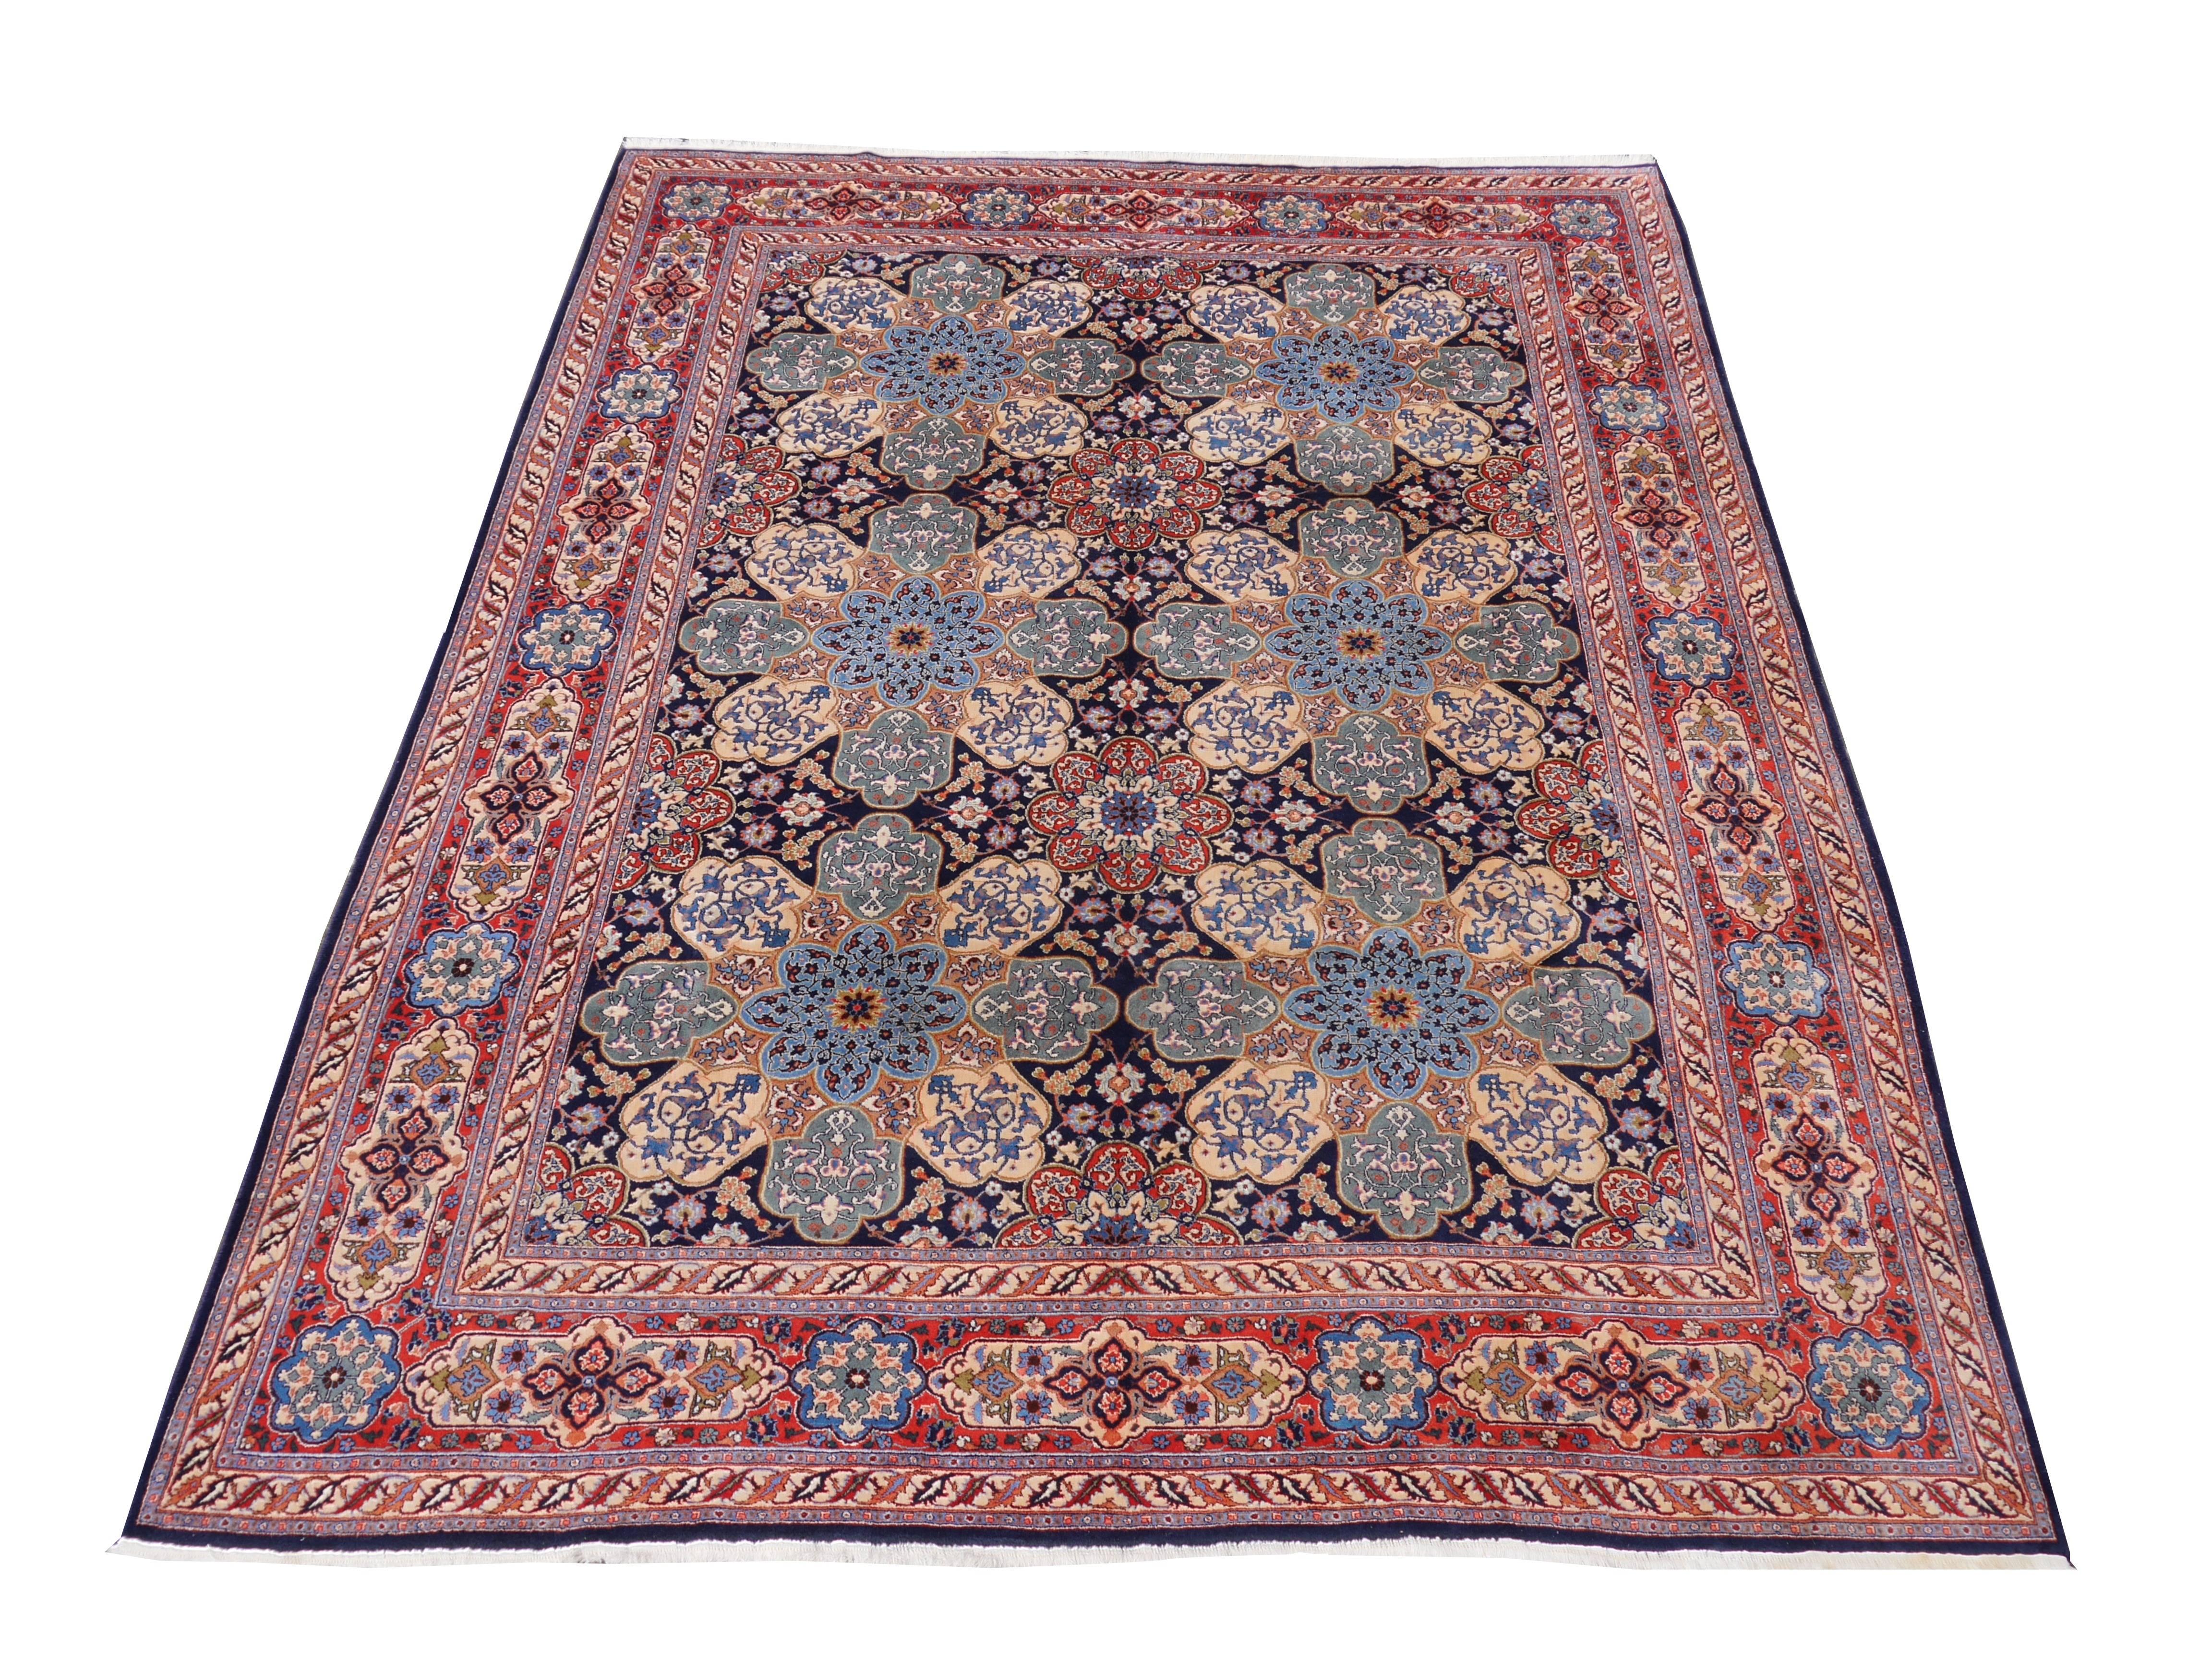 Very beautiful and unusual Persian vintage rug Kerman Yazd. These rugs come from the South East of Persia, near the desert Lut (Dasht-e-Lut) wich is one of the hottest areas in Persia. This rug was hand-knotted by skilled artisians making a very